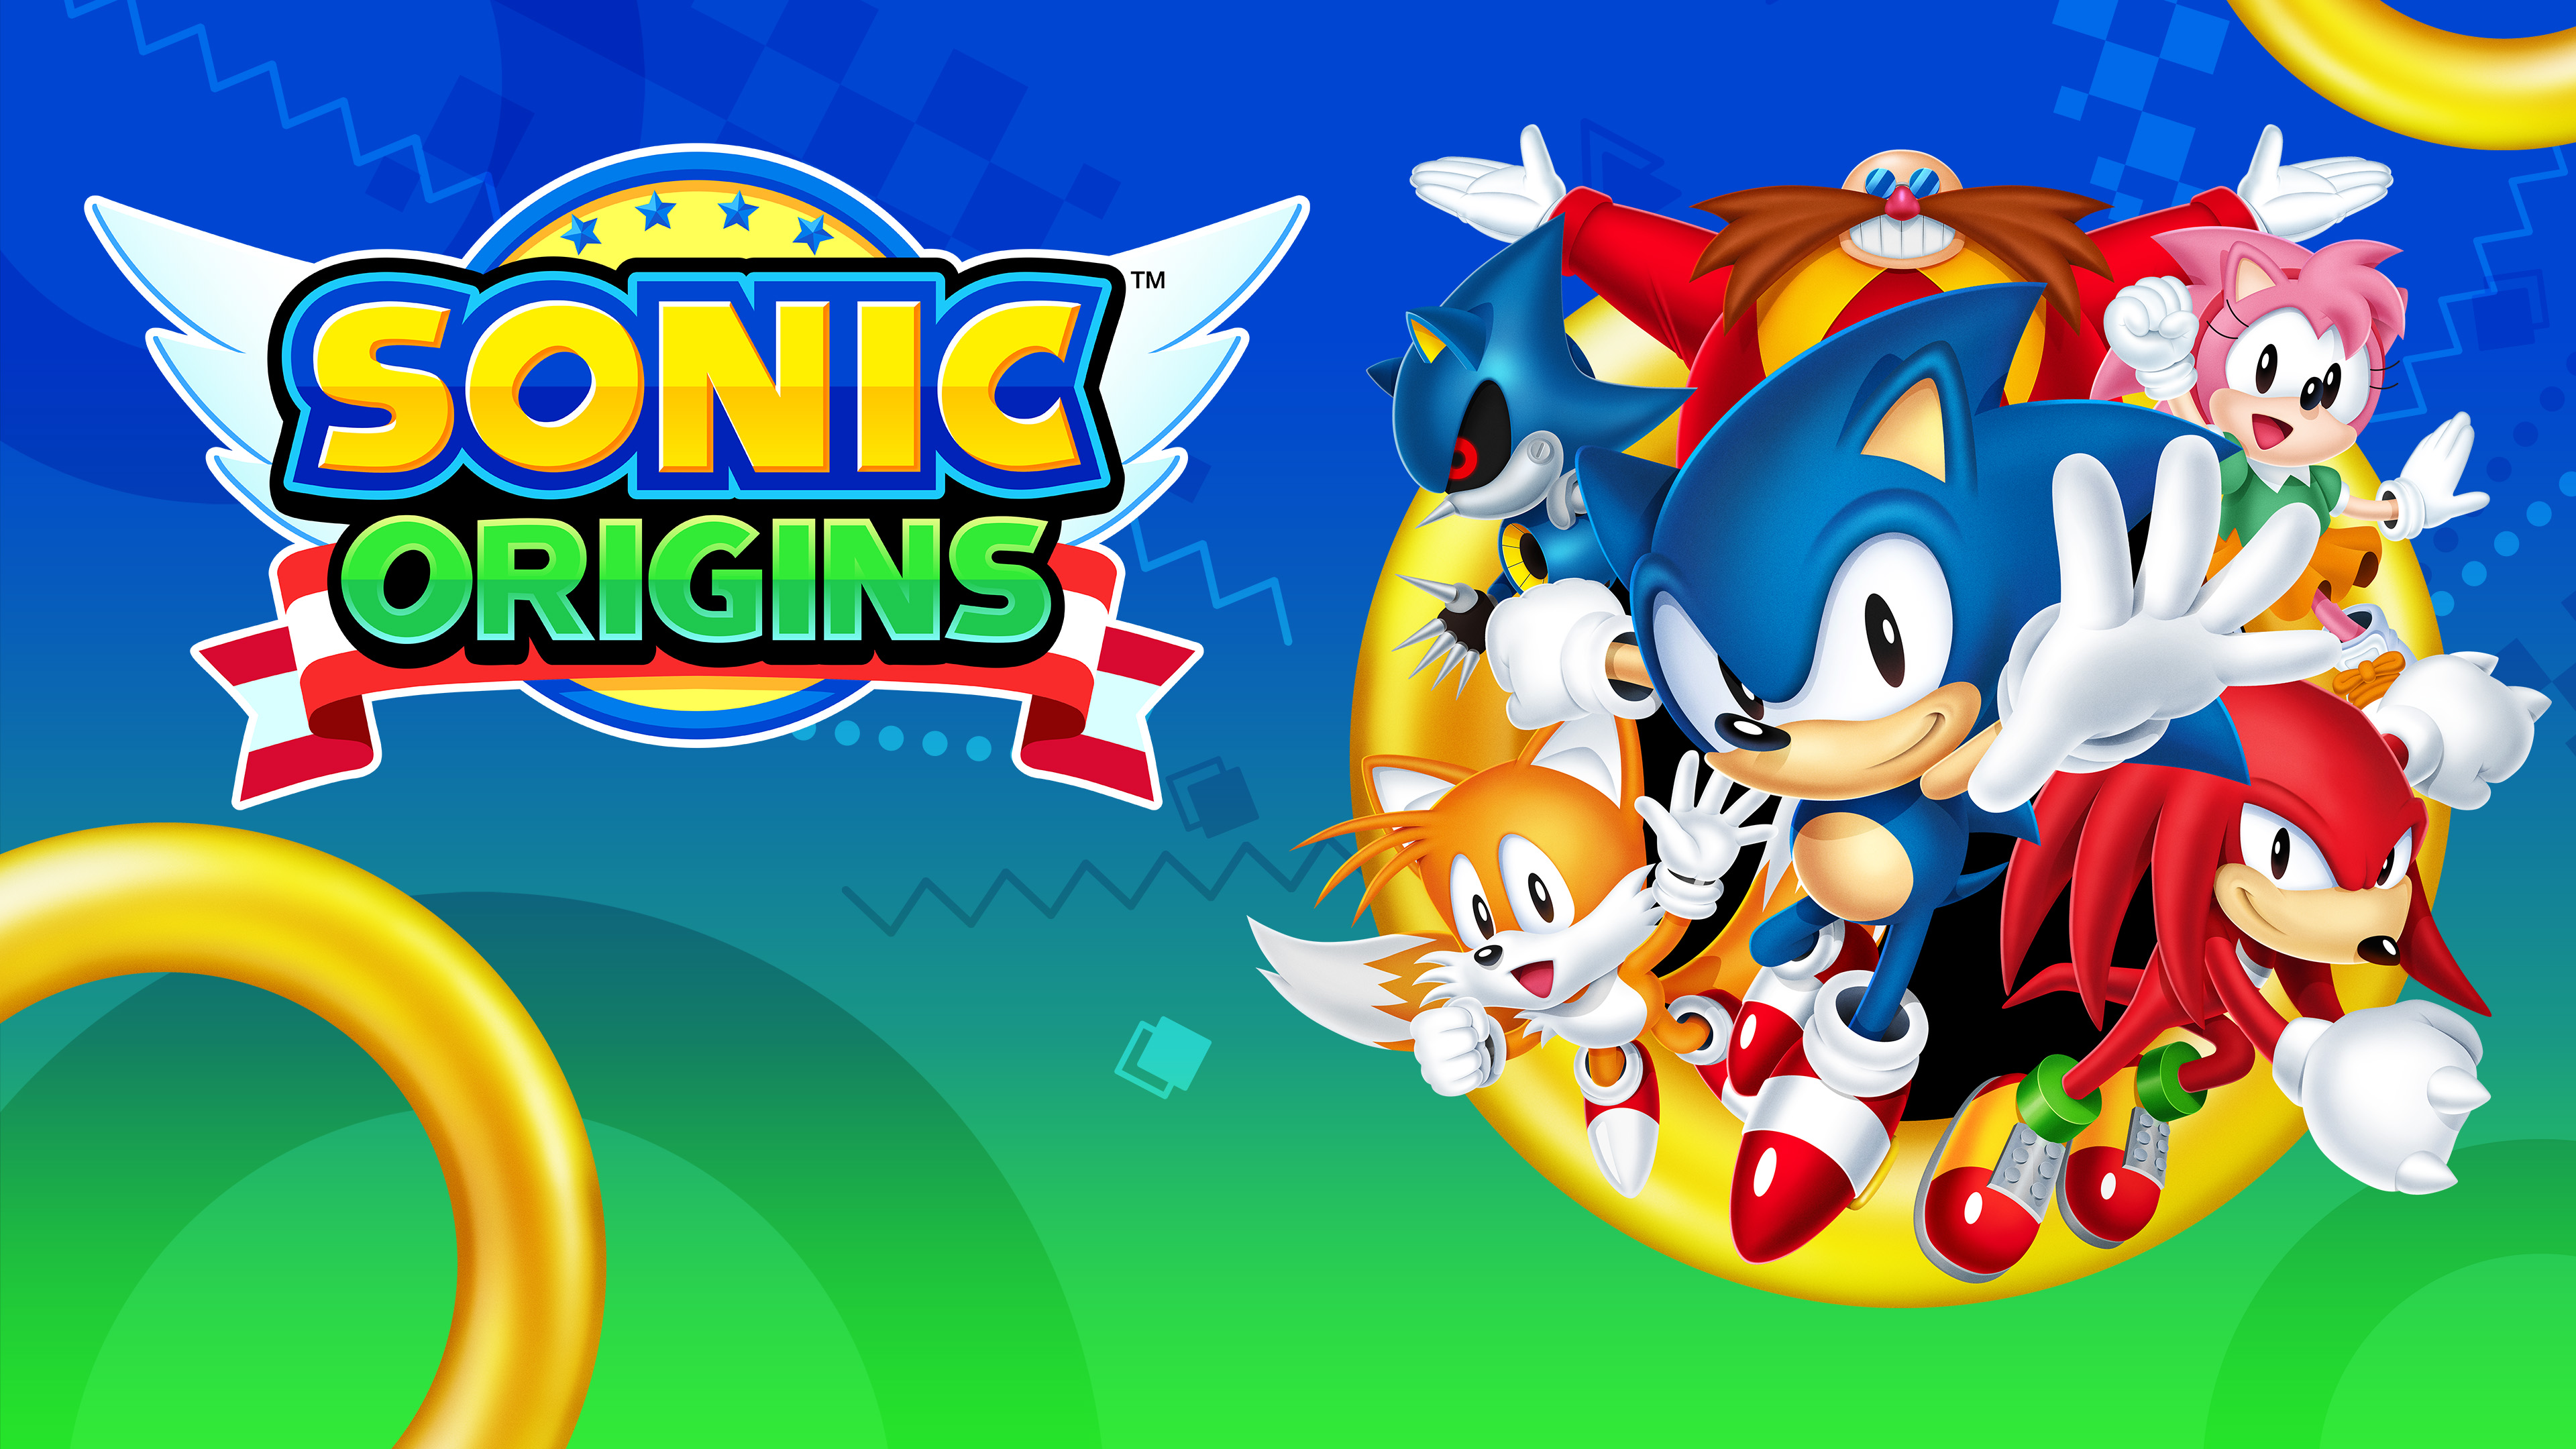 Sonic Origins will soon be the only way to play these classic Sonic